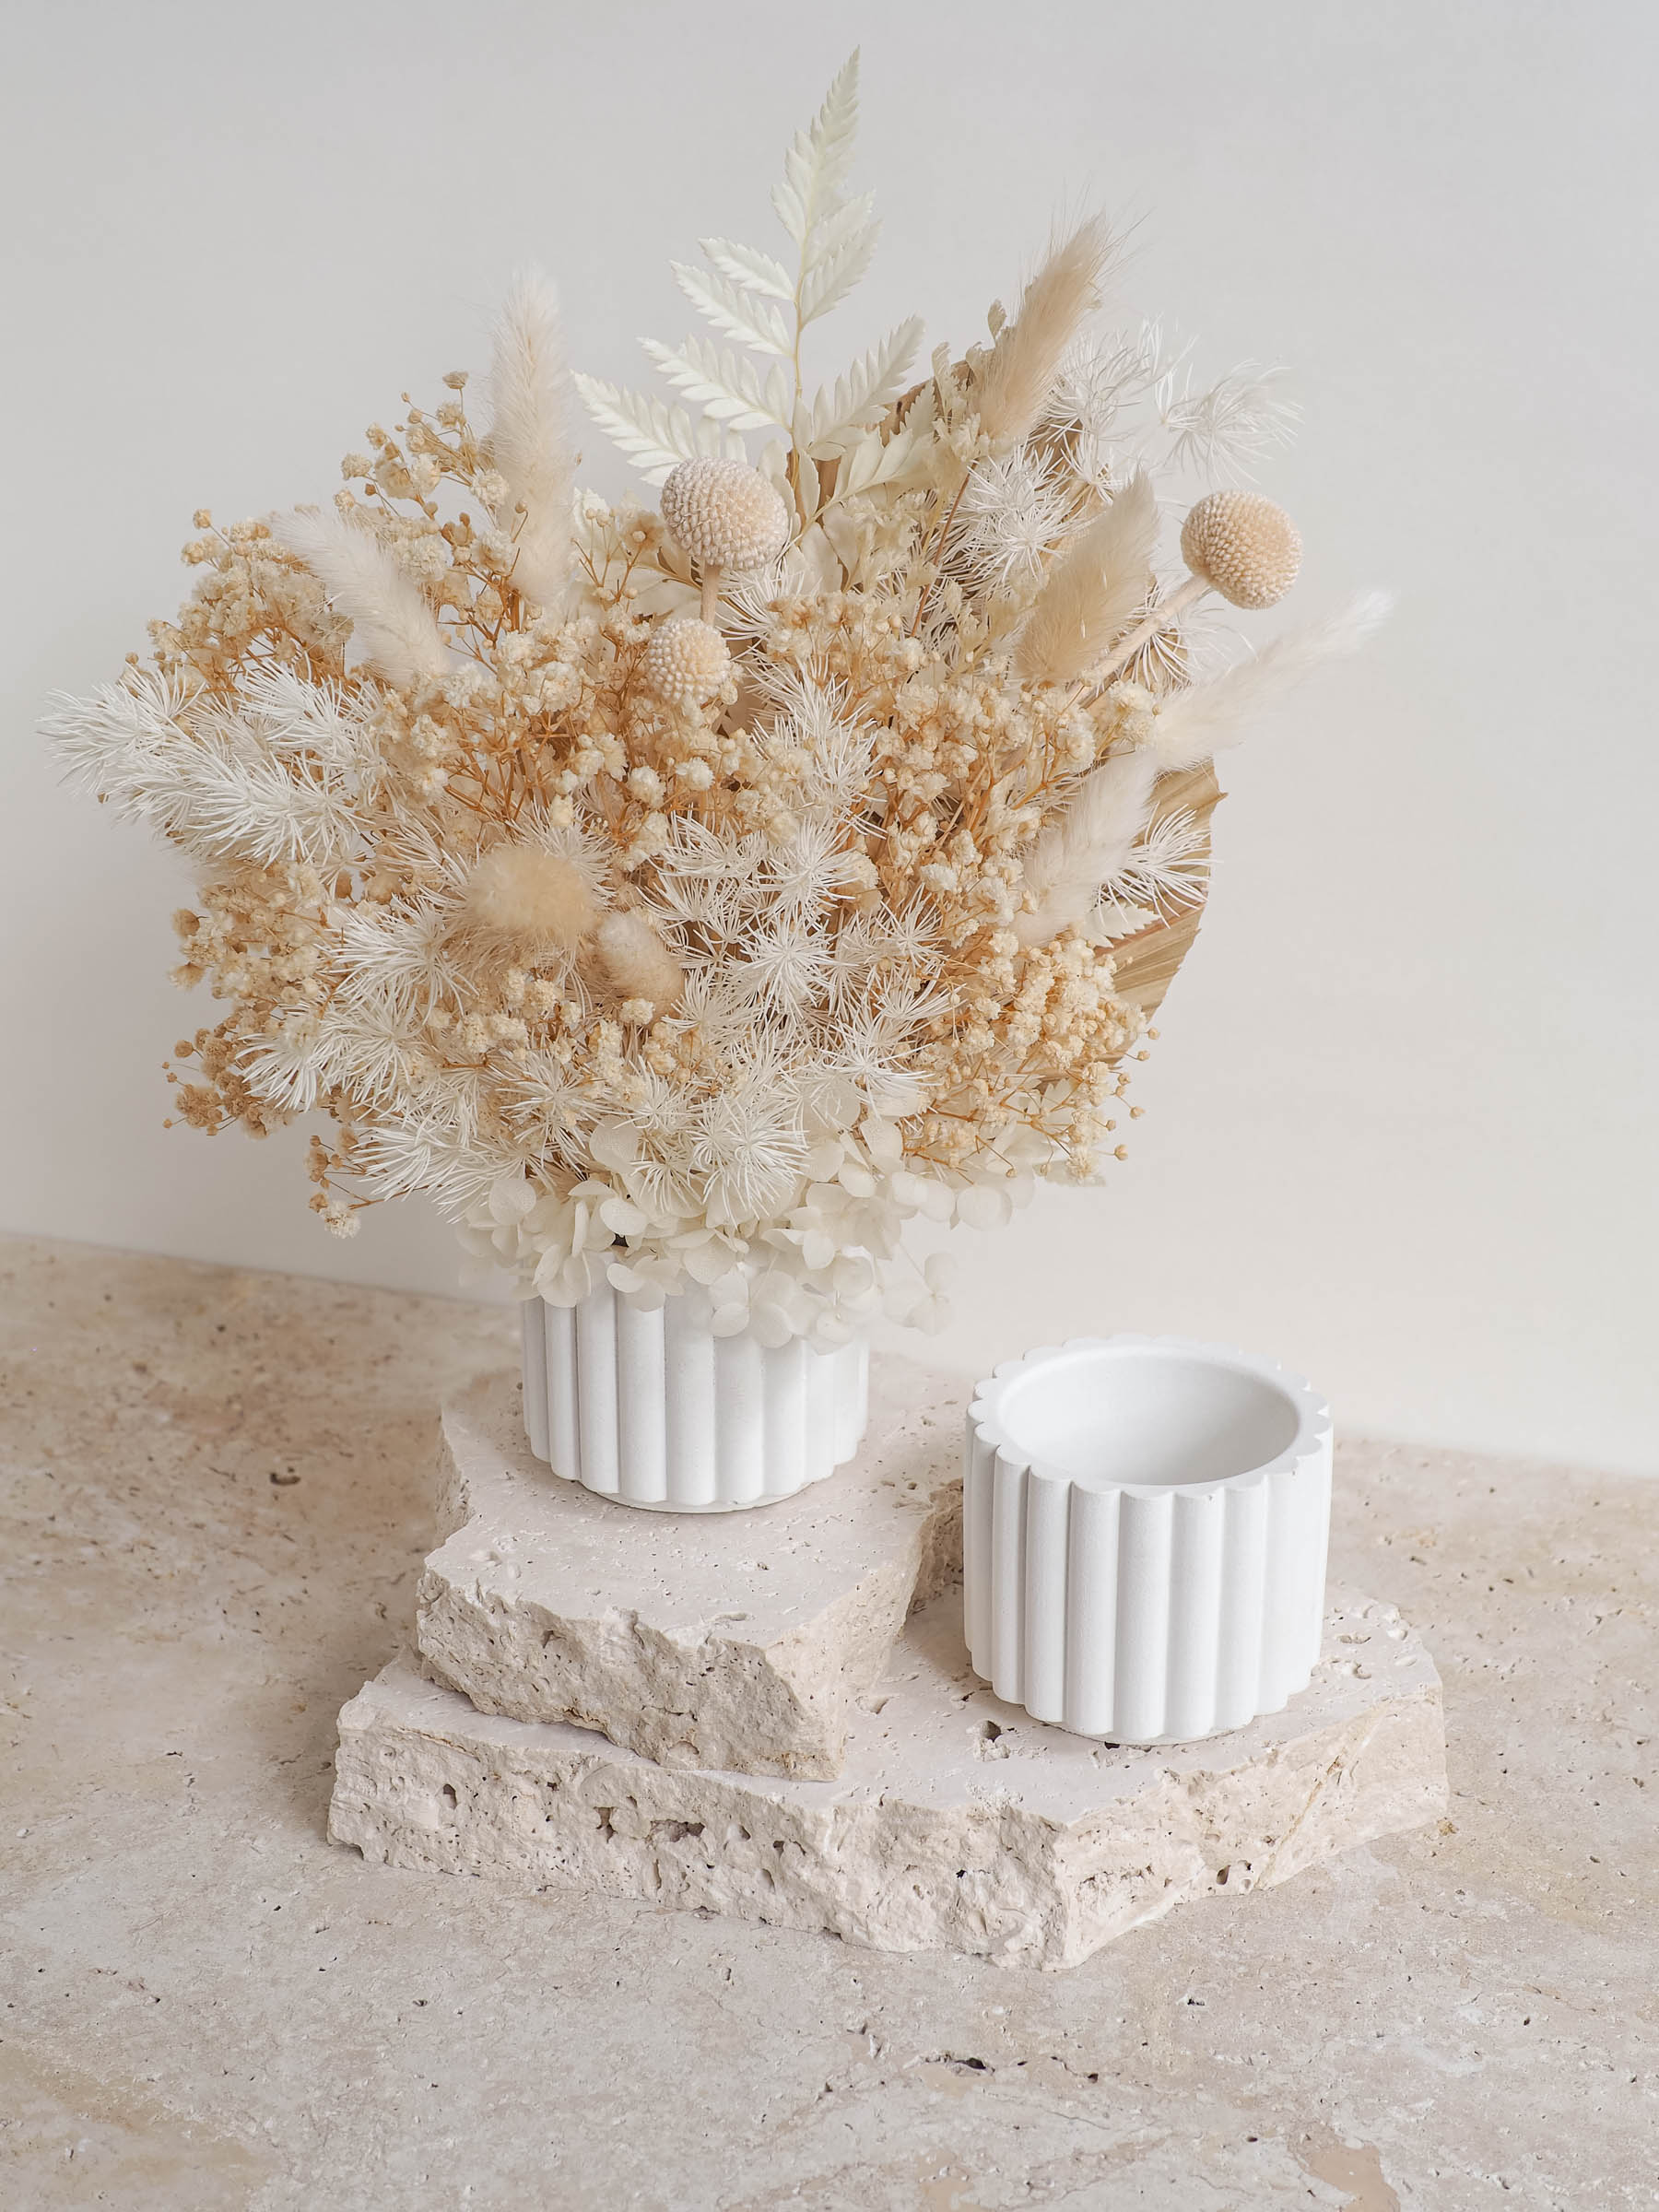 Florence mini scalloped vase with dried floral arrangements on a travertine table